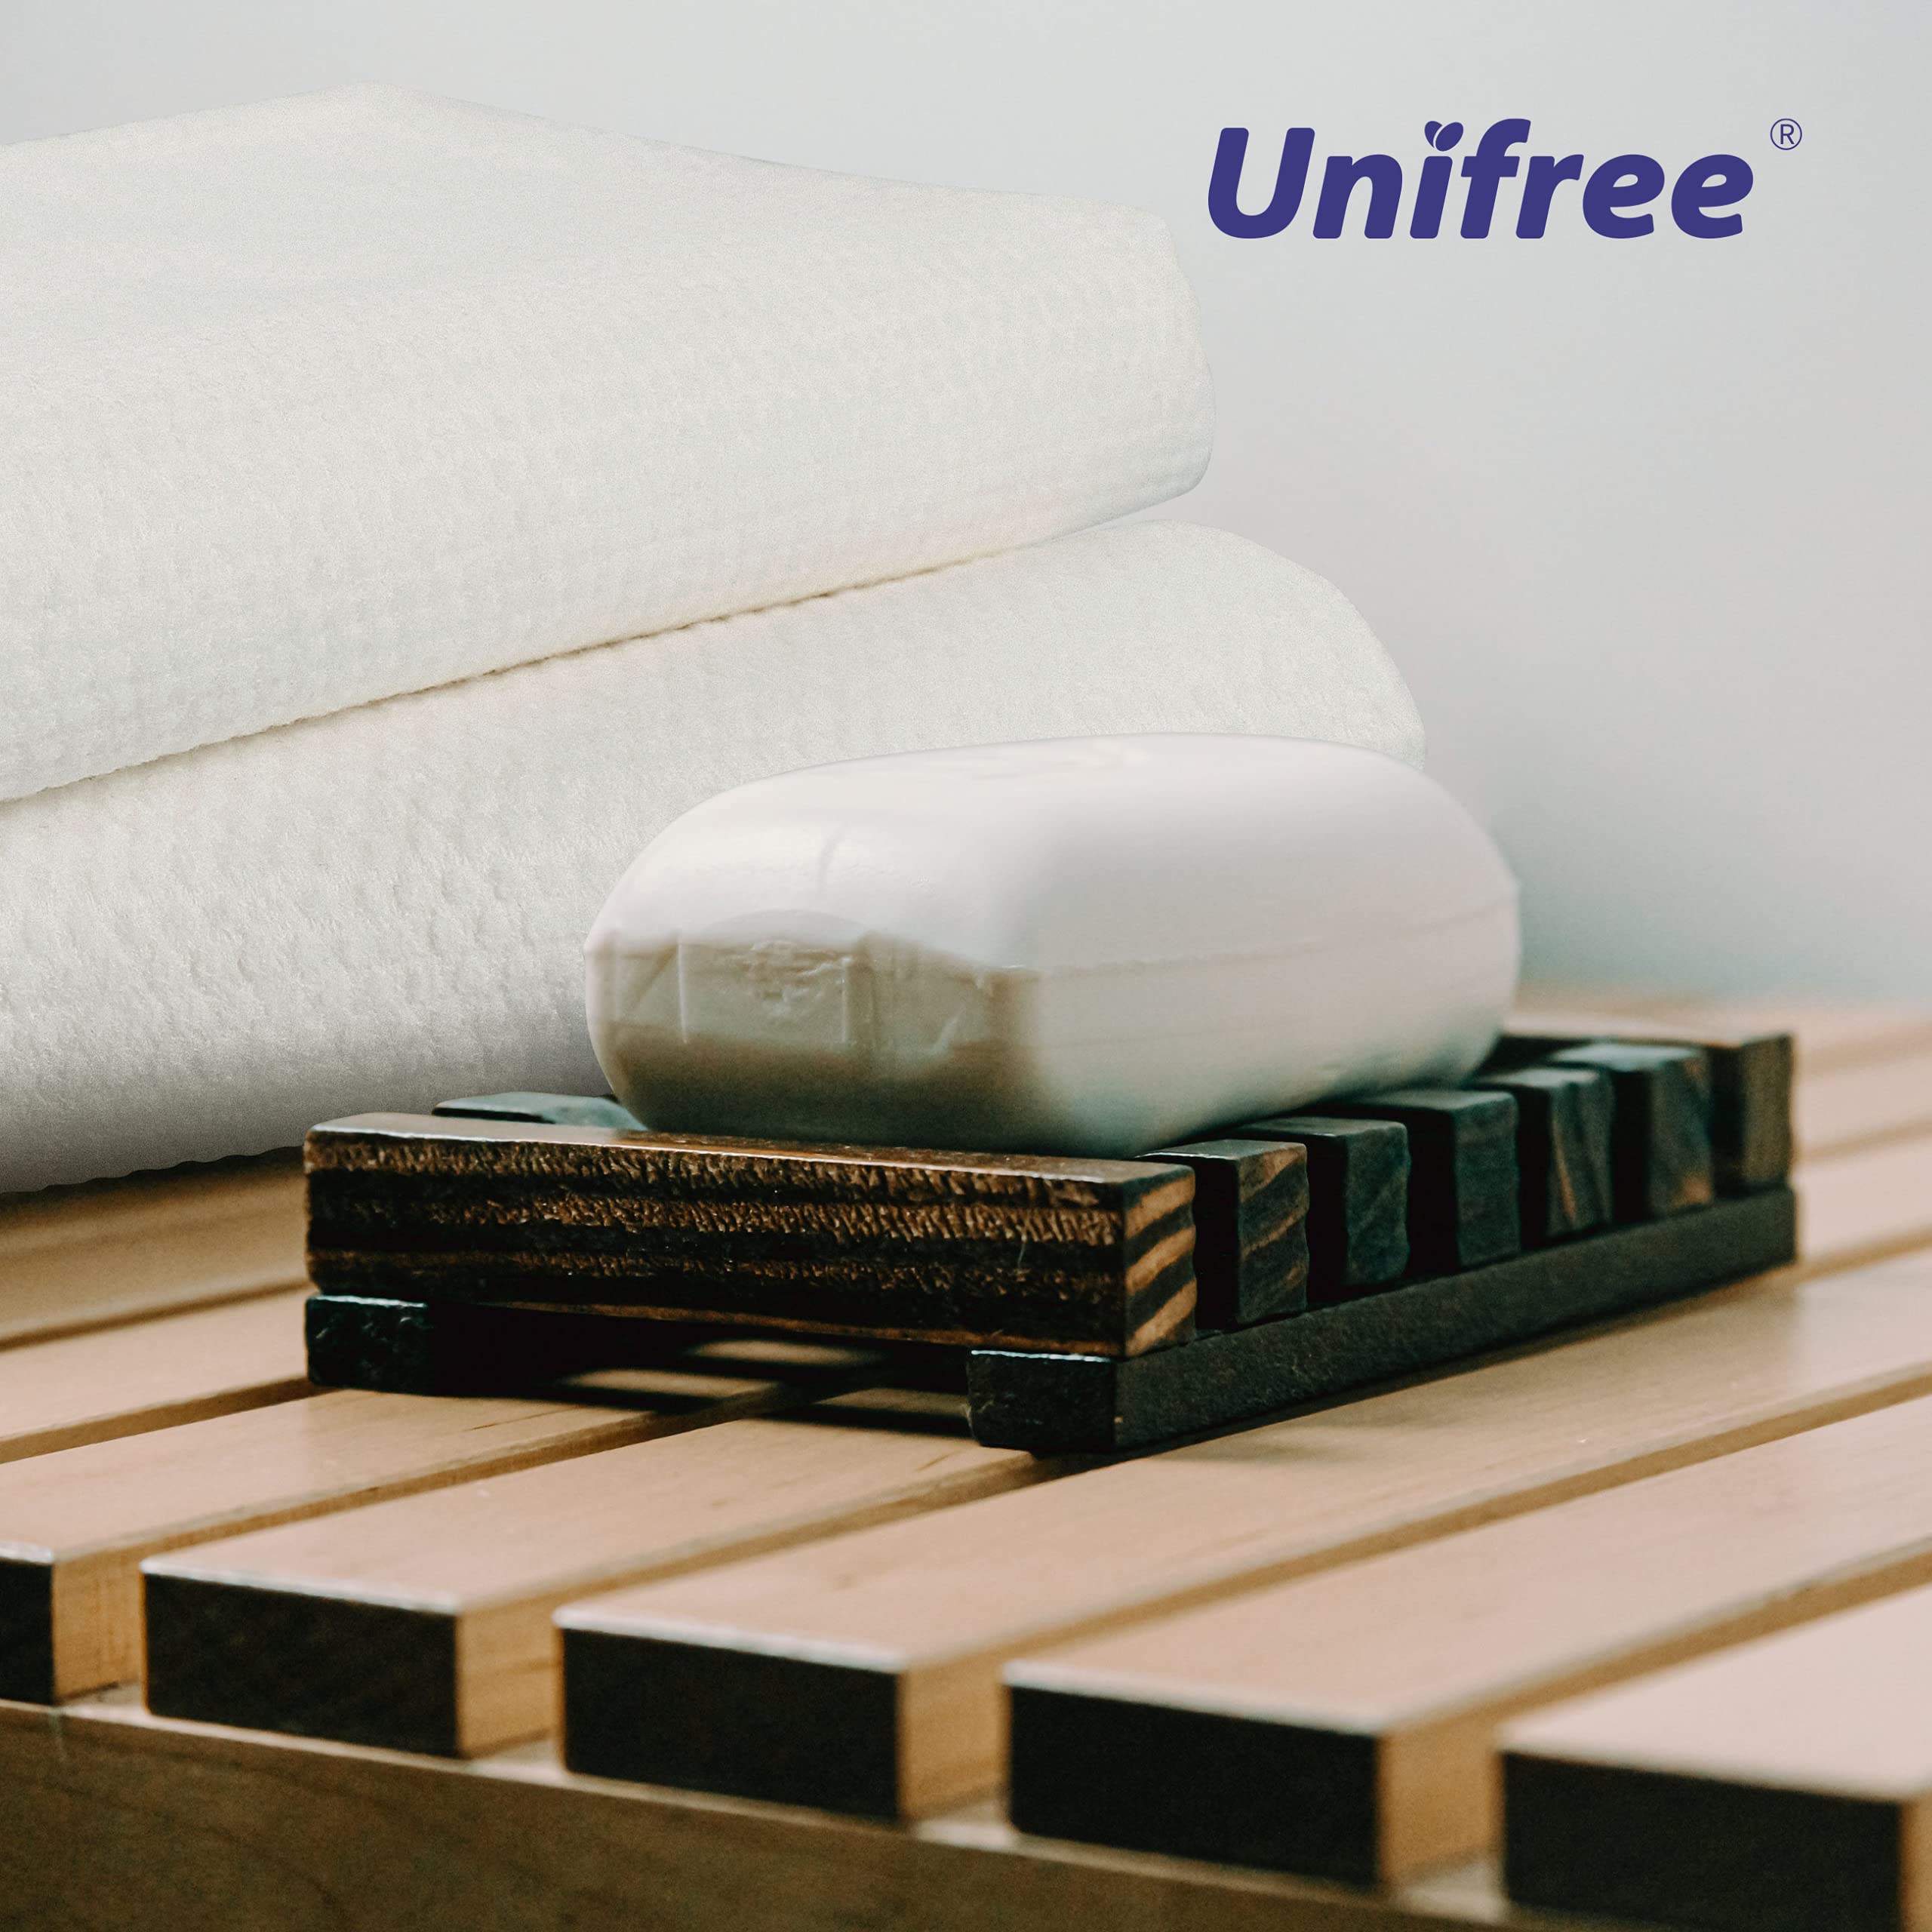 UNIFREE Disposable Bath Towels 丨Camping Towel I Gym Towel I Barber Towel 20 Count, Individually Packed, Large Size 27.5 by 55 inches (27.5“x55”)